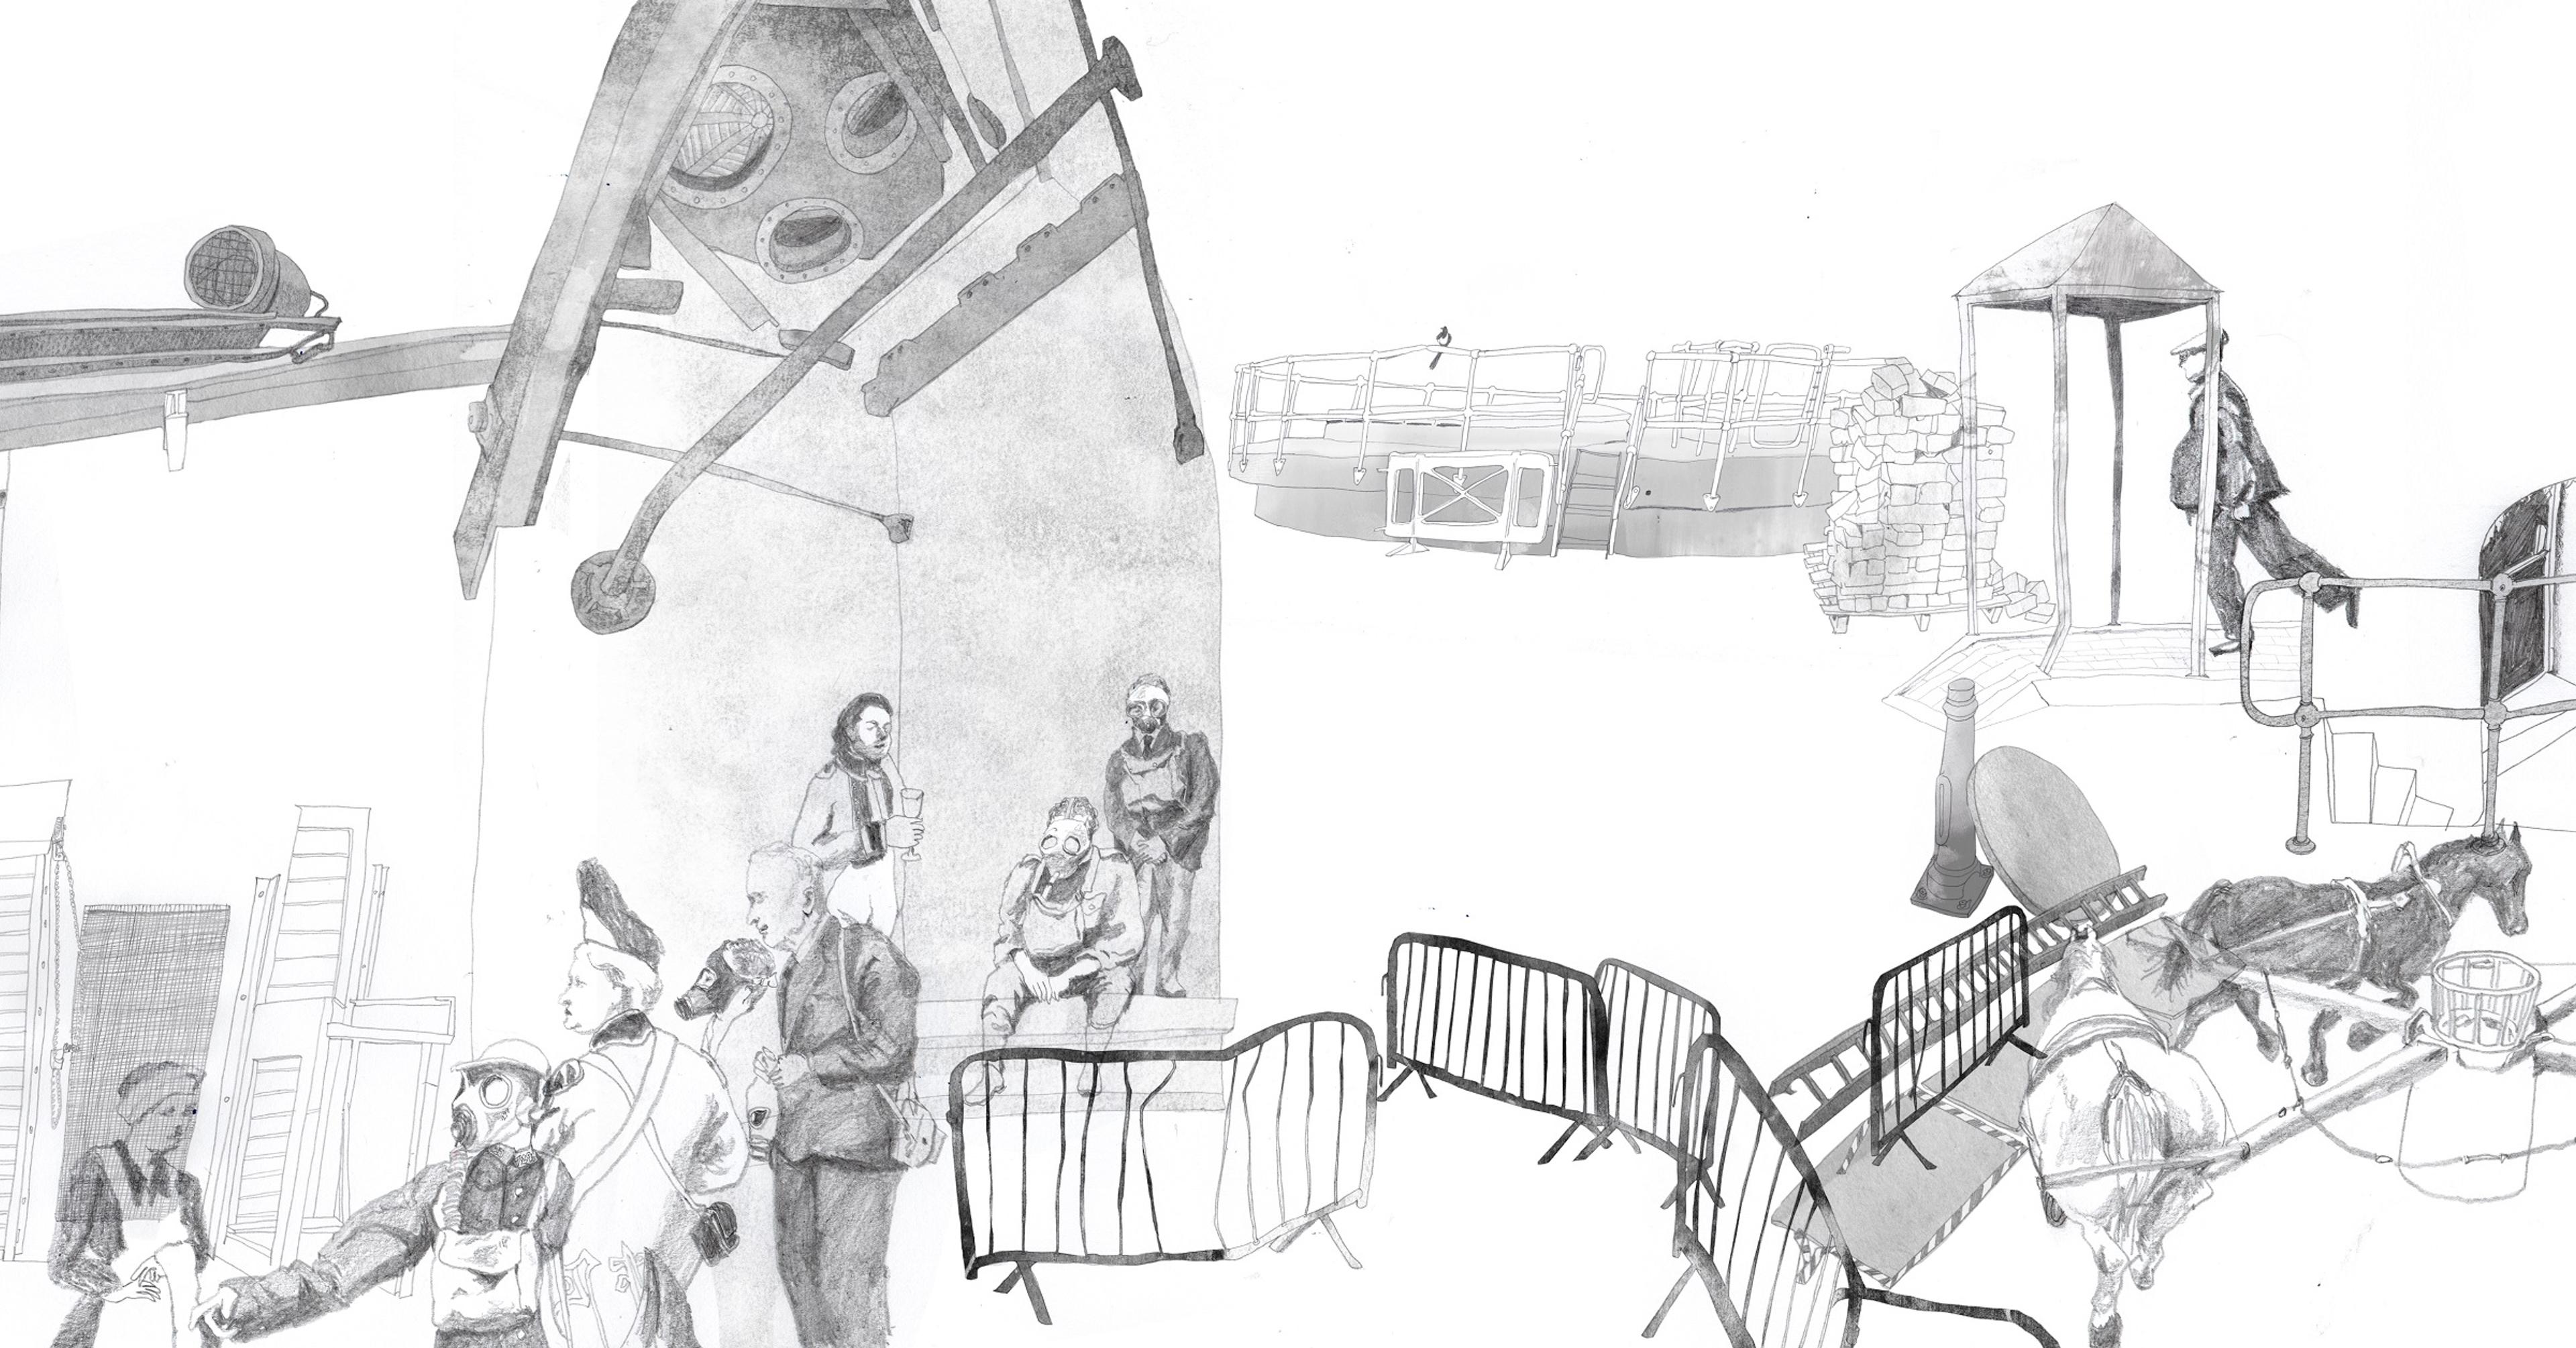 Pencil sketch showing industrial interior with a woman in 1920s dress, people in old military dress and people in gas masks and exterior scene with crash barriers and working horses